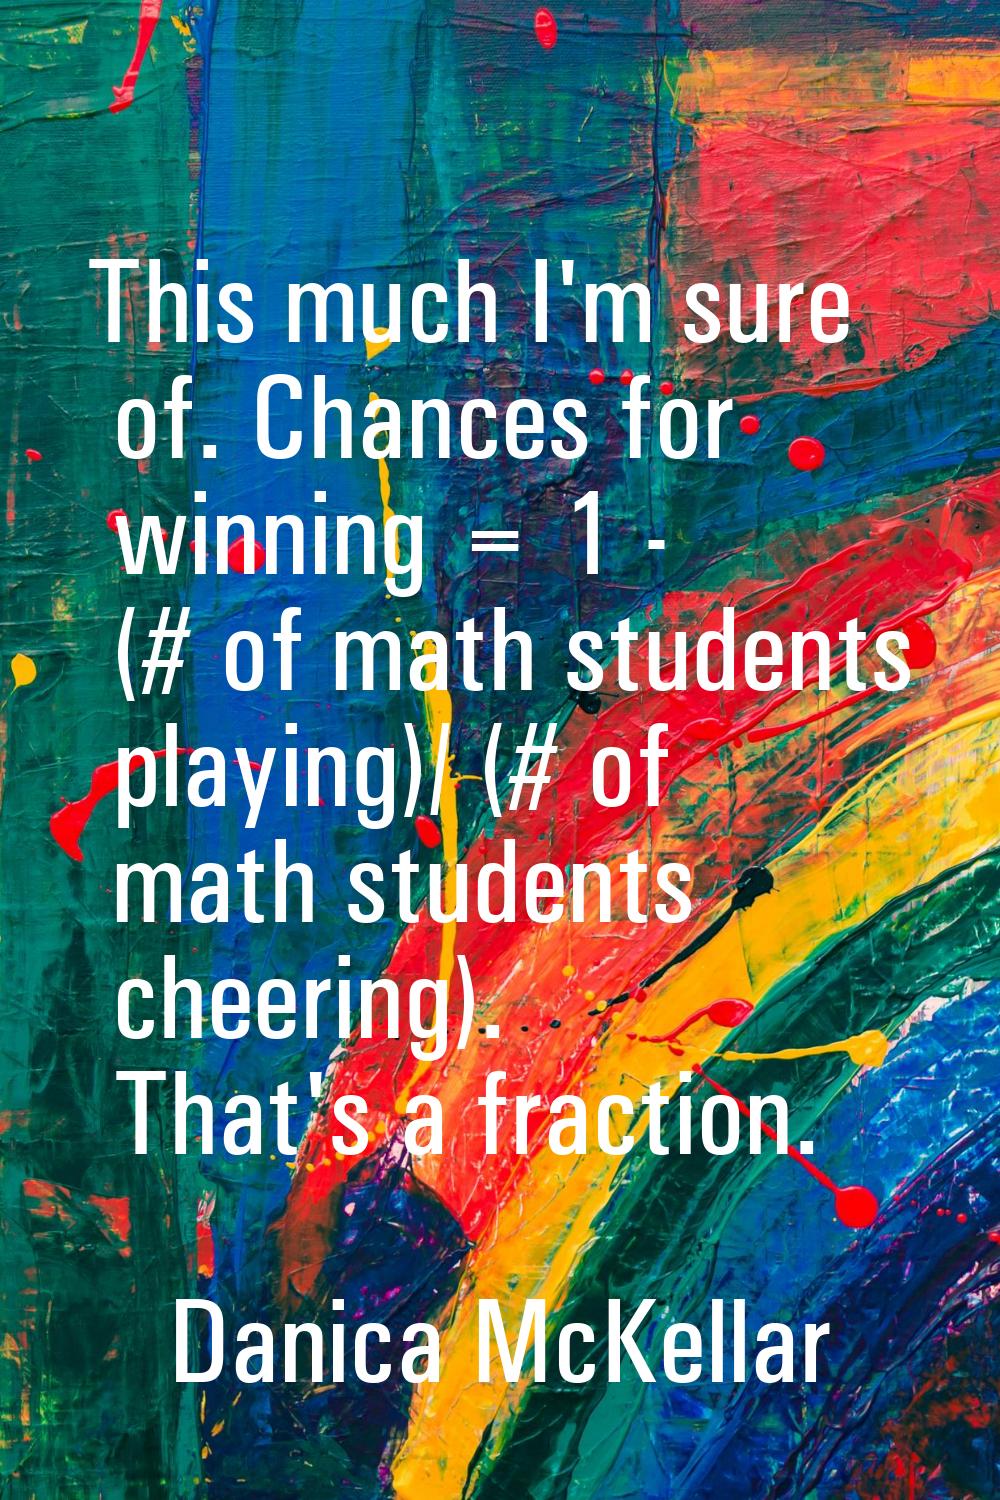 This much I'm sure of. Chances for winning = 1 - (# of math students playing)/ (# of math students 